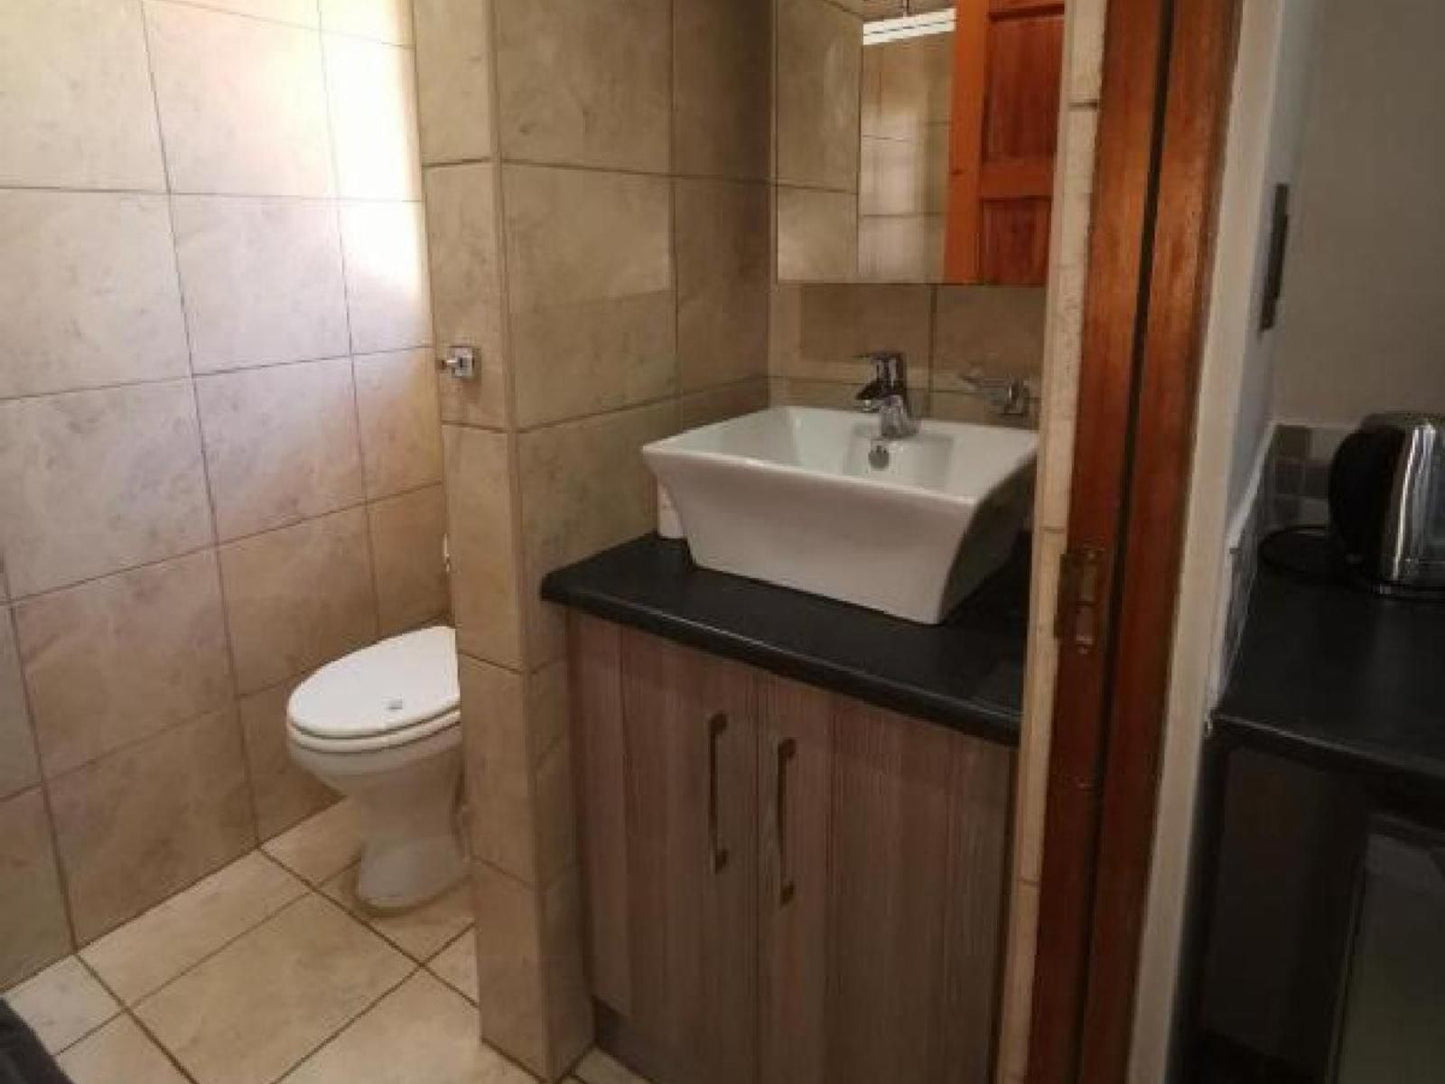 Guest Suites On Connor Willows Bloemfontein Free State South Africa Bathroom